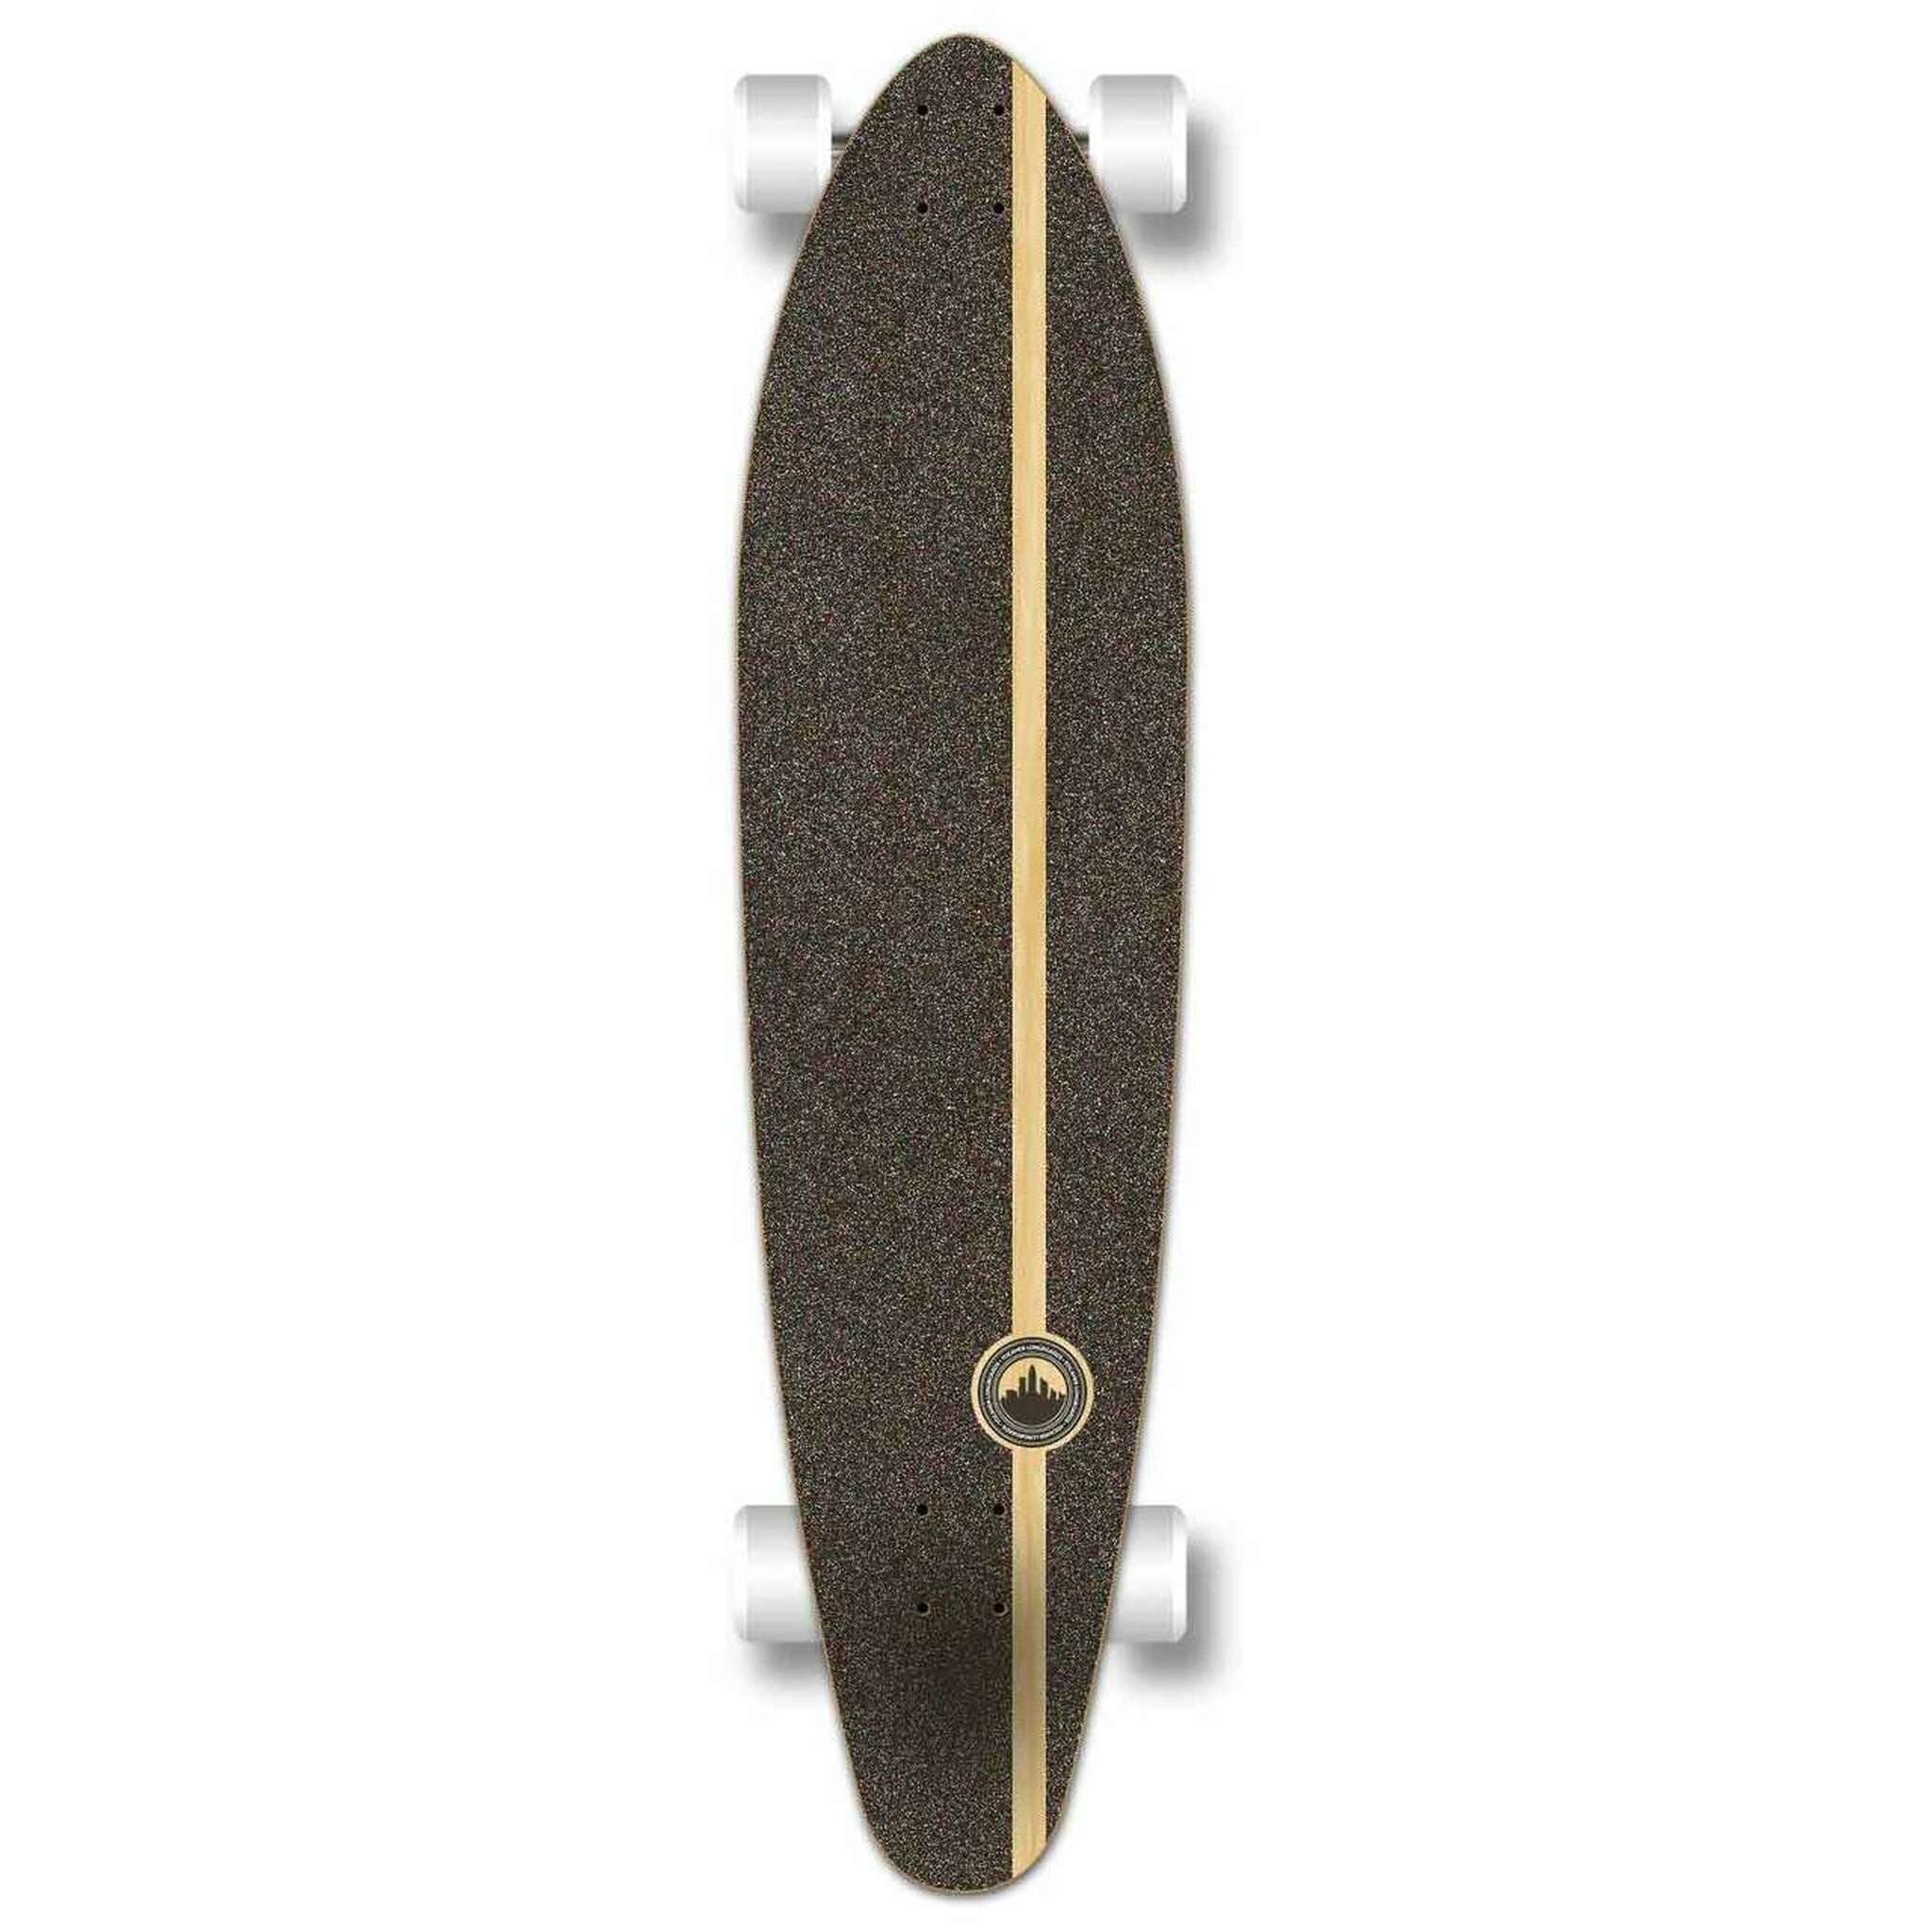 YOCAHER - Getaway Kicktail Longboard - Planche Complete